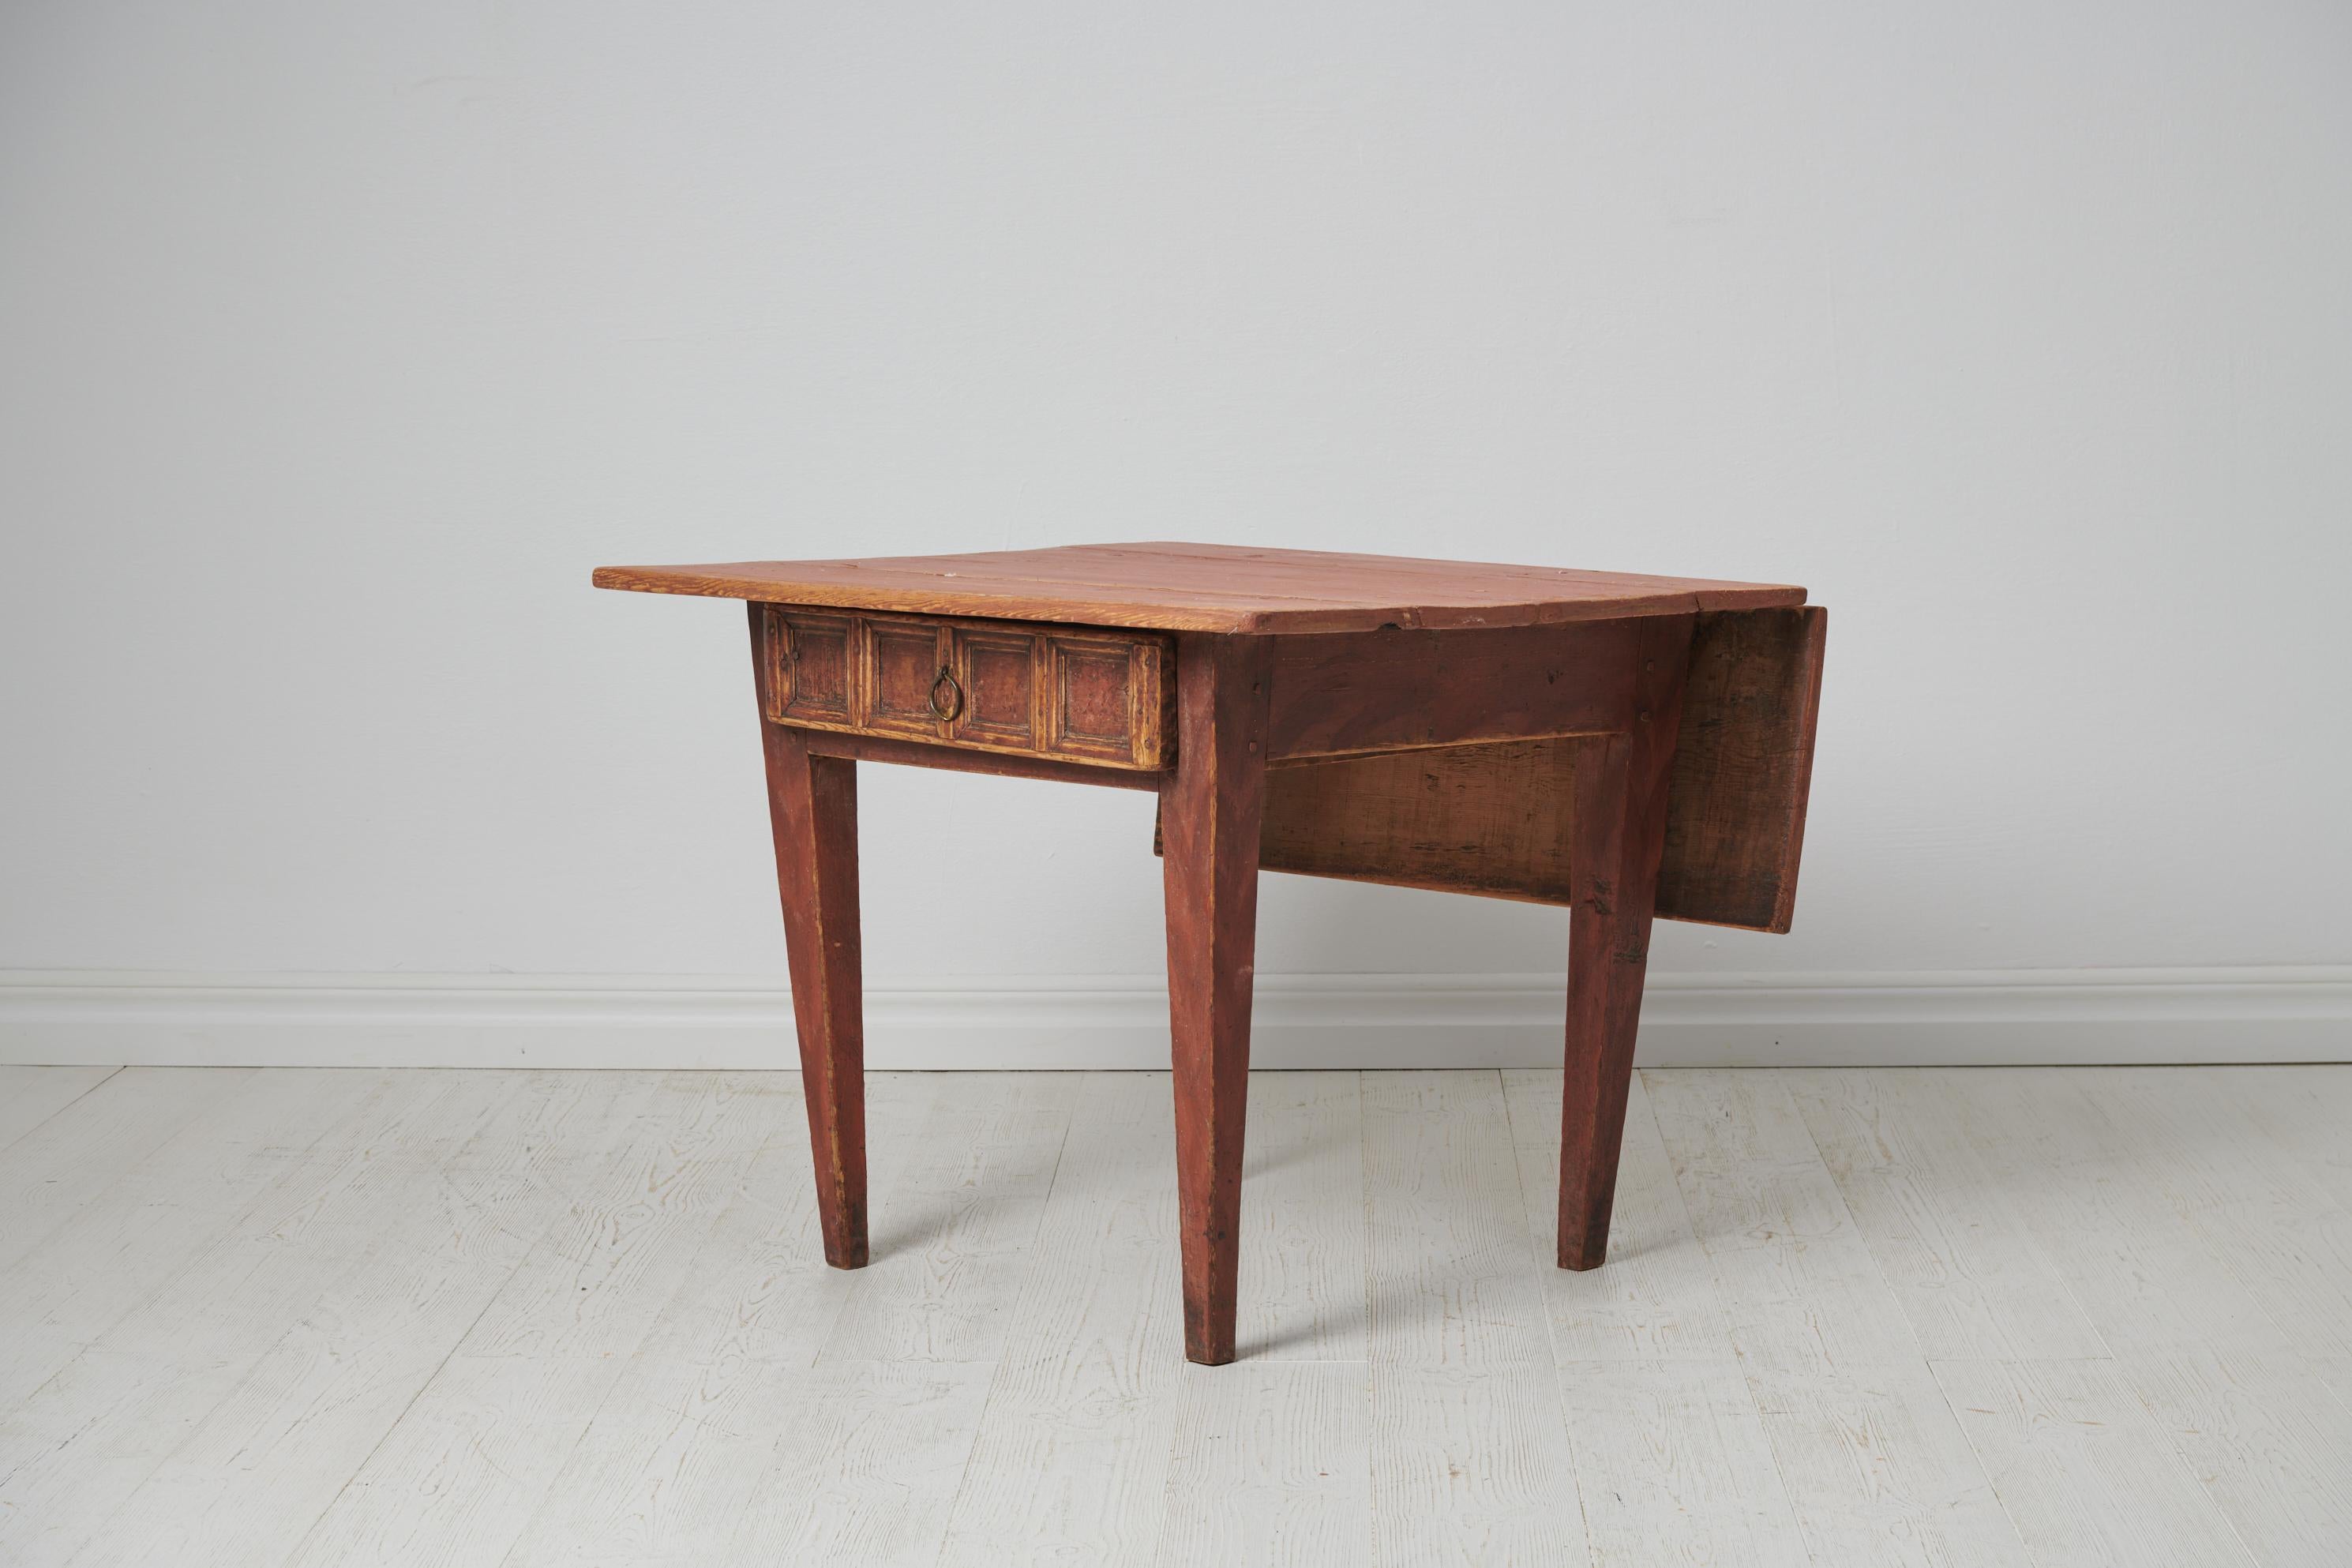 Antique Small Charming Northern Swedish Folk Art Table  In Good Condition For Sale In Kramfors, SE